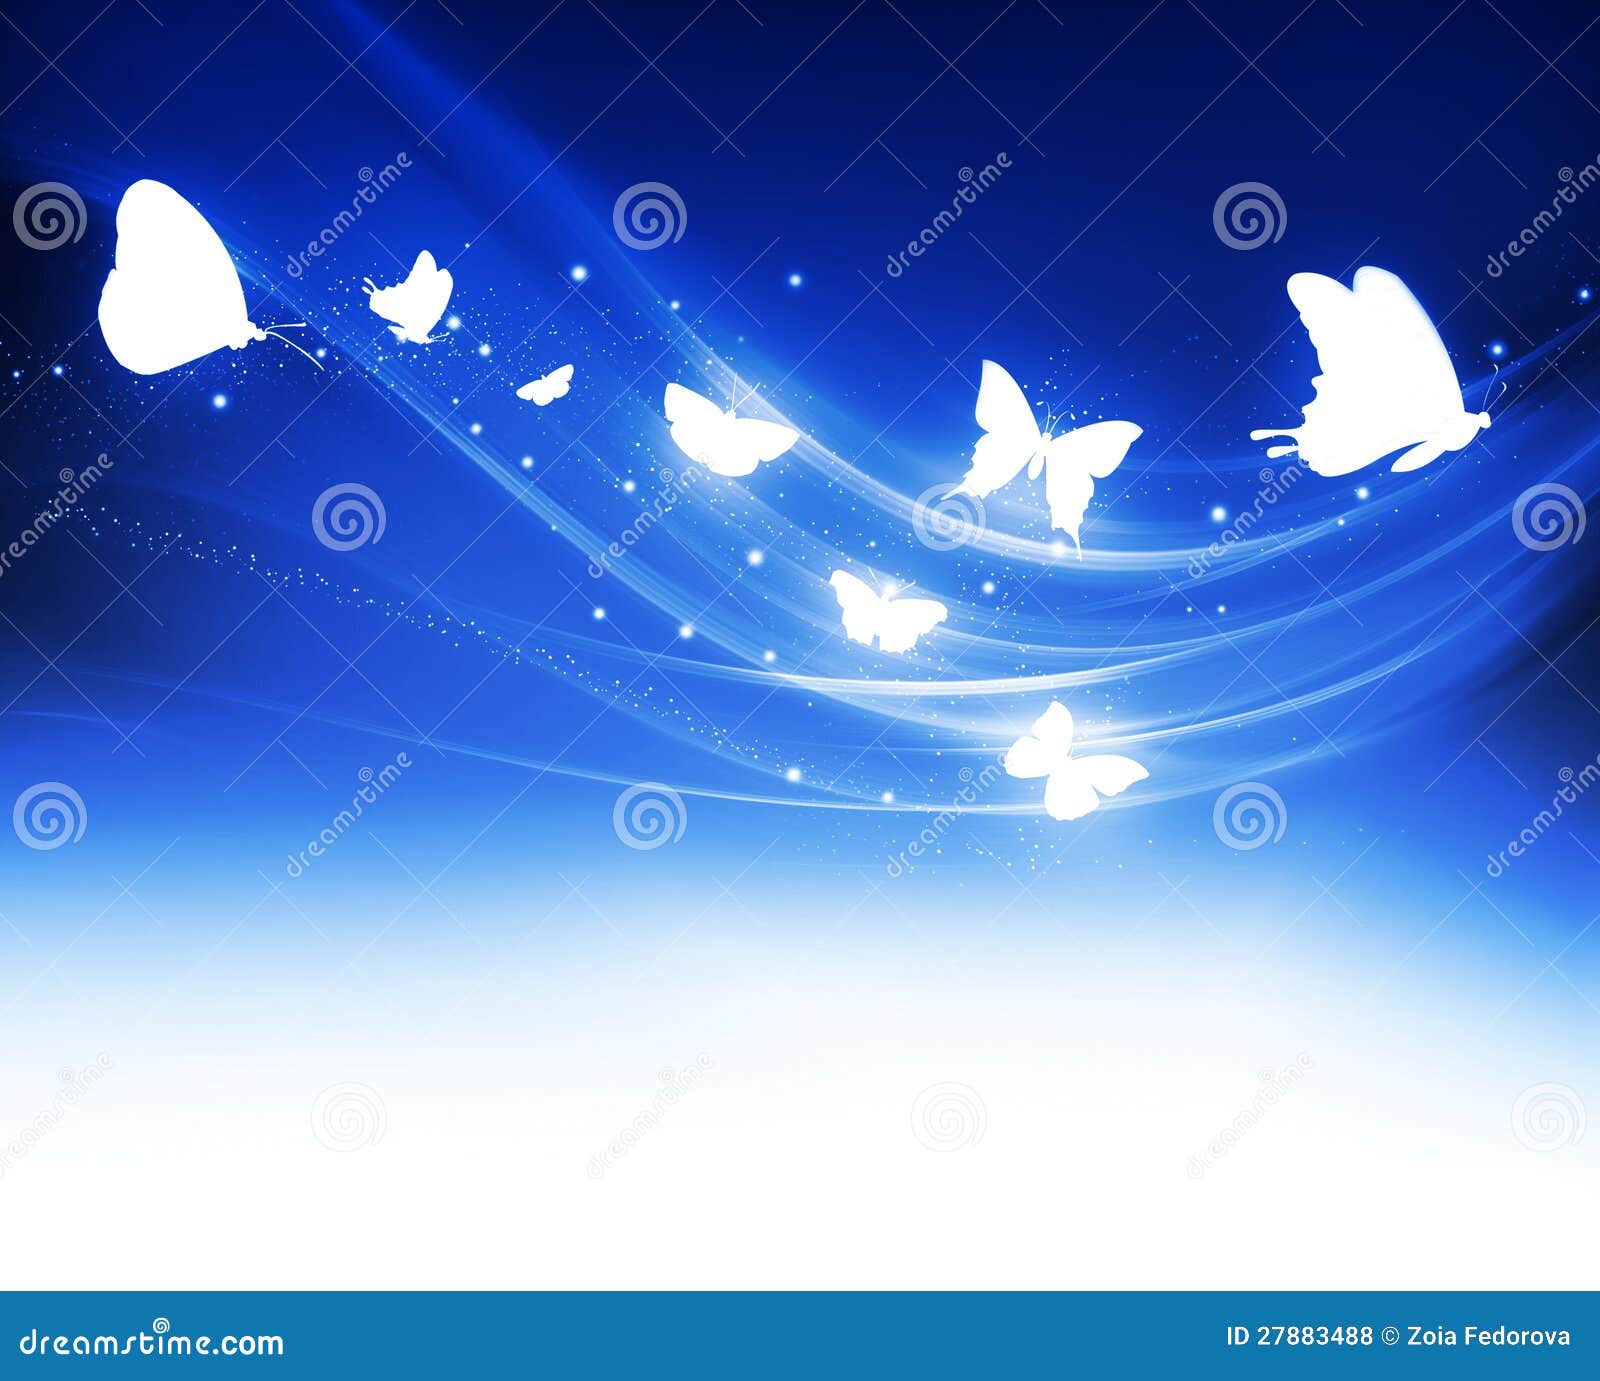 Glowing Butterflies Royalty Free Stock Photos - Image: 27883488